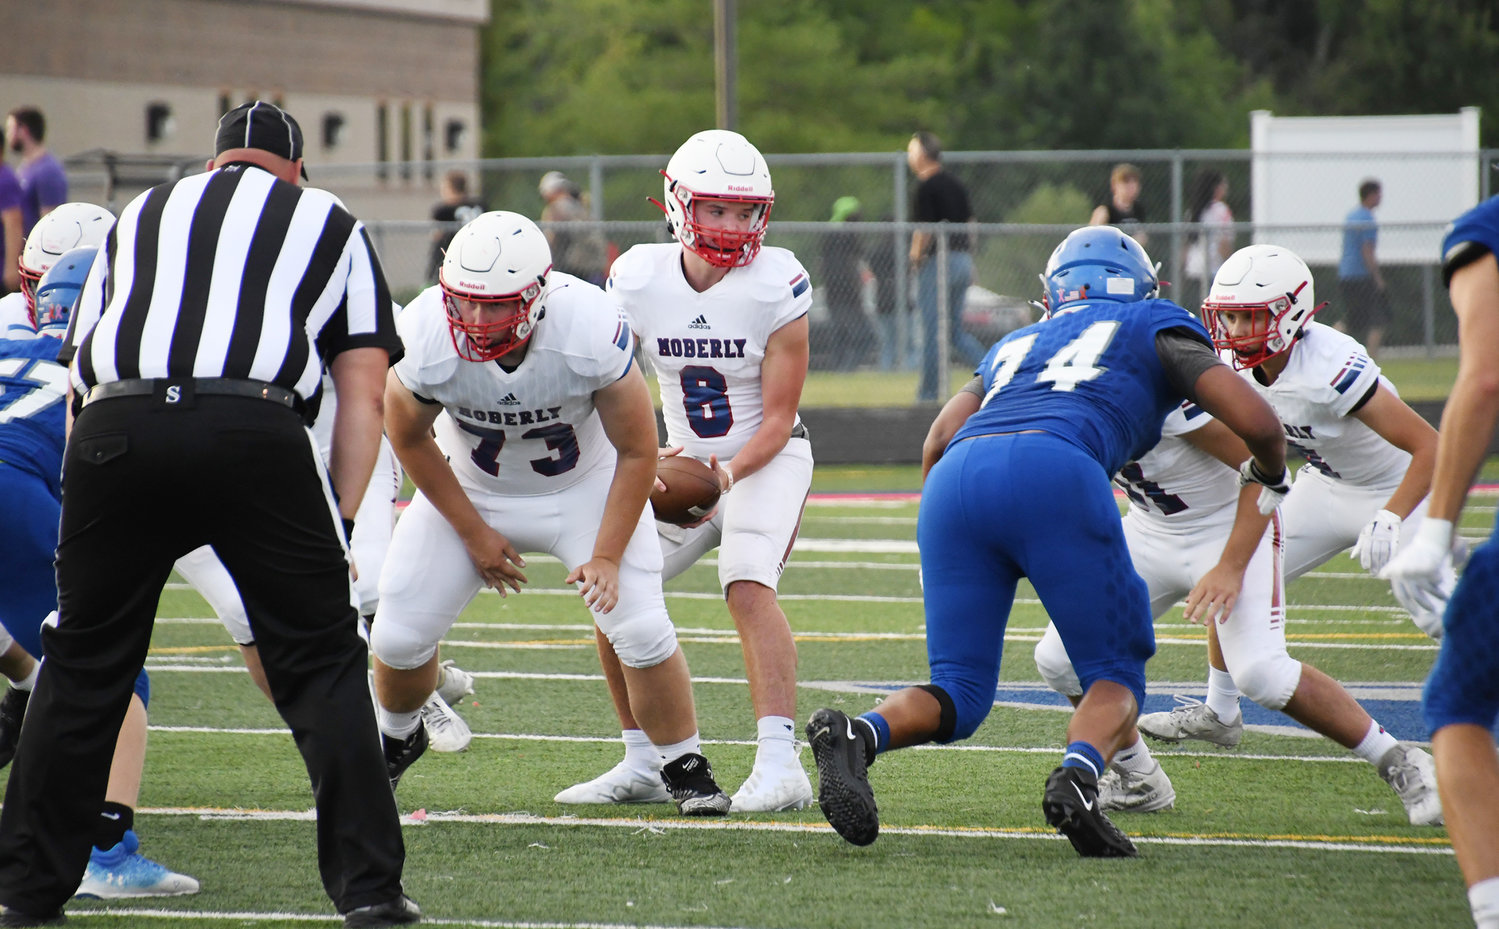 Moberly senior starting quarterback Collin Huffman starts the play, preparing to hand off to Hunter Boots.